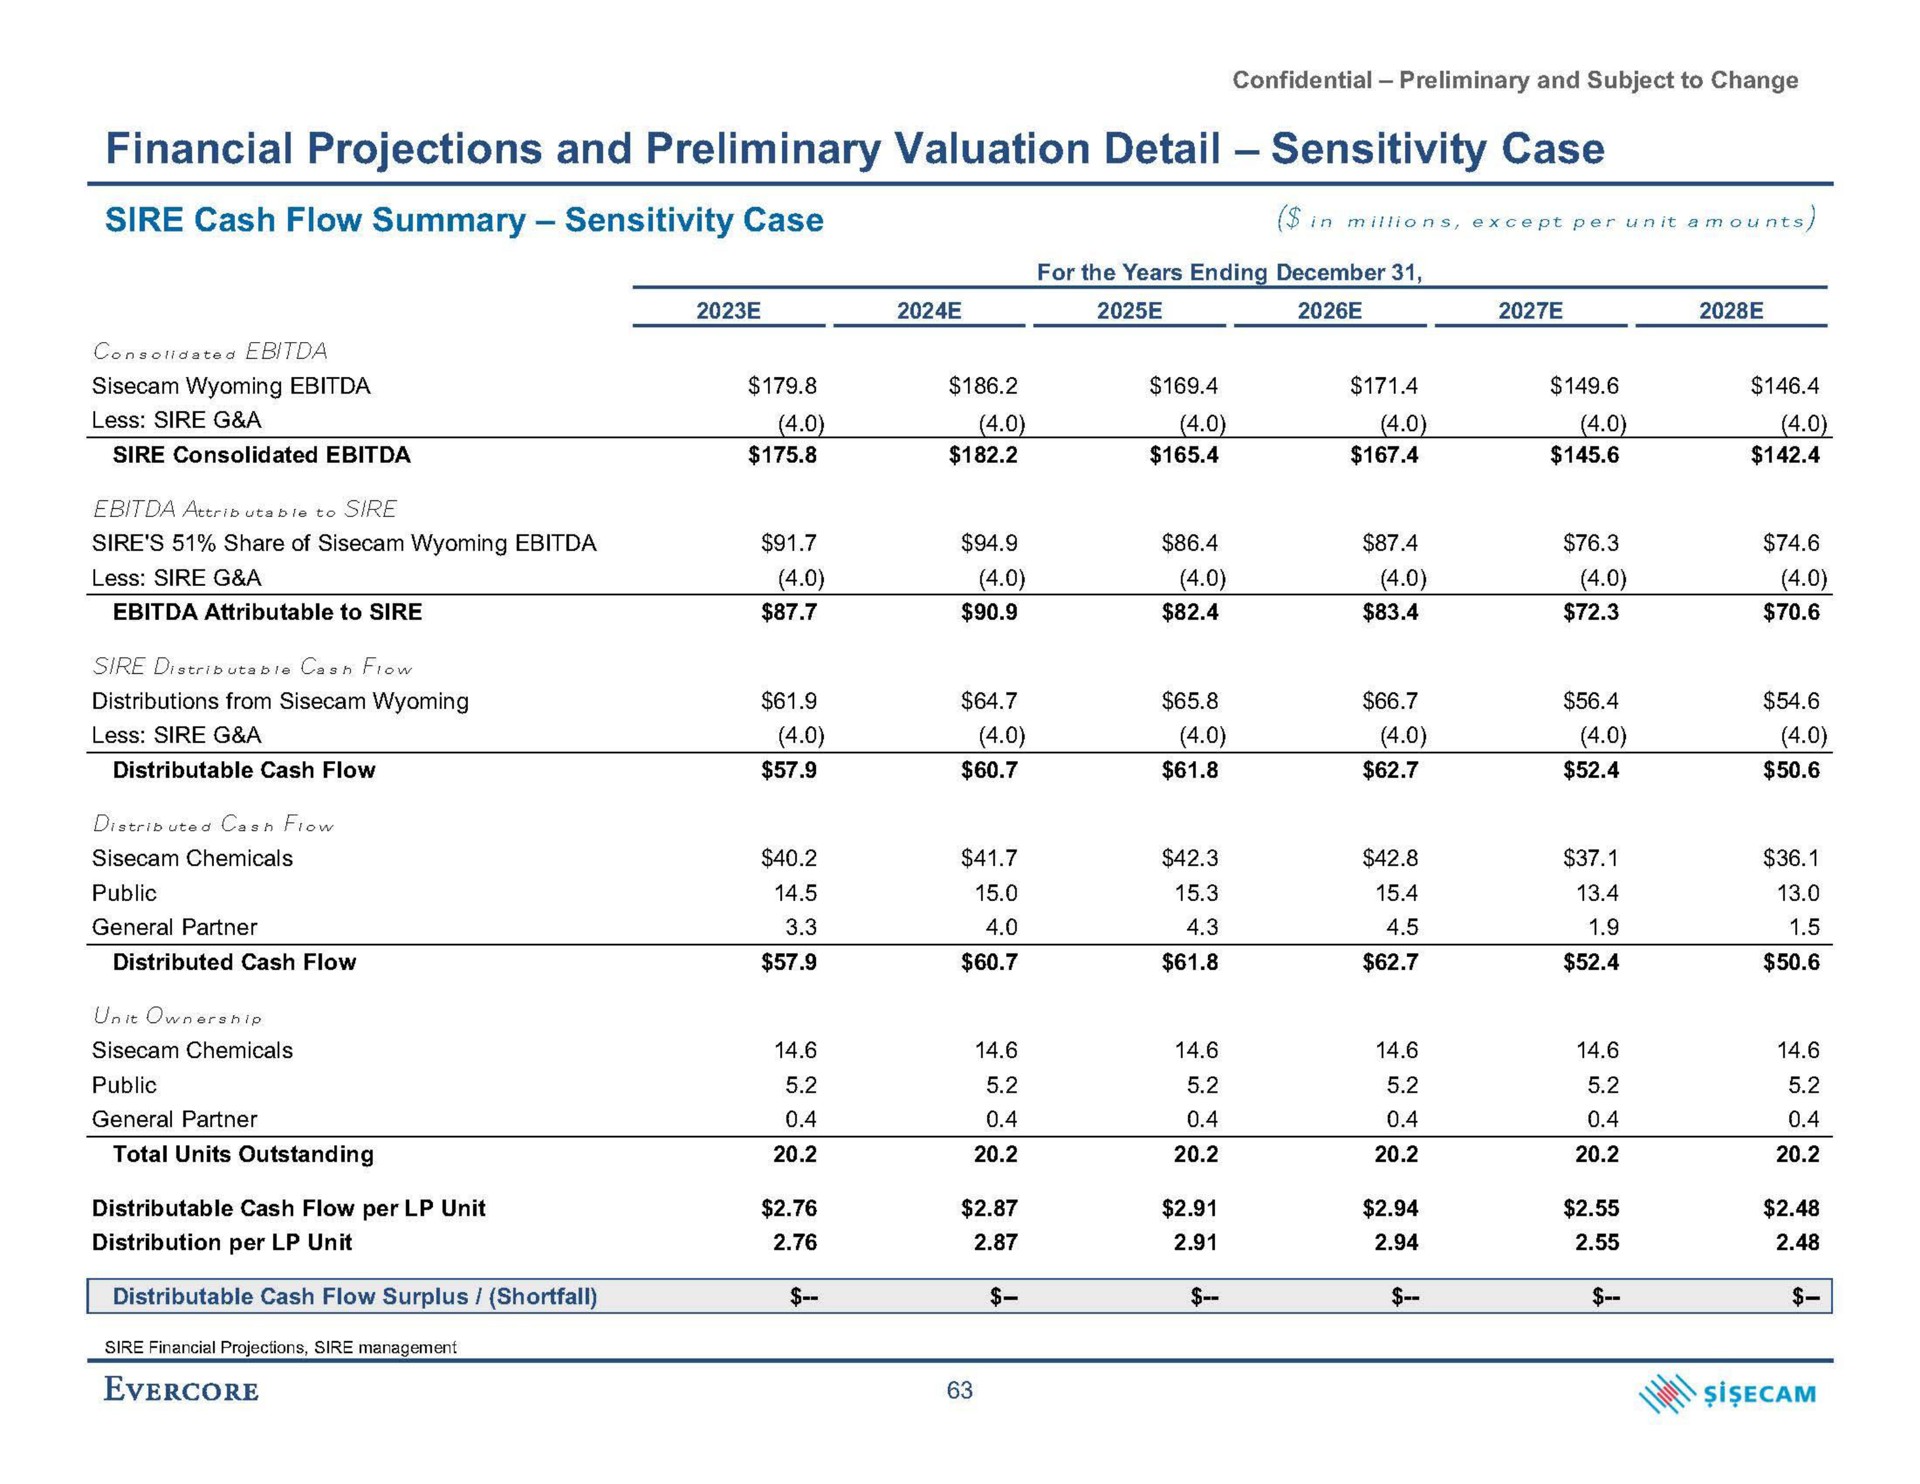 financial projections and preliminary valuation detail sensitivity case | Evercore